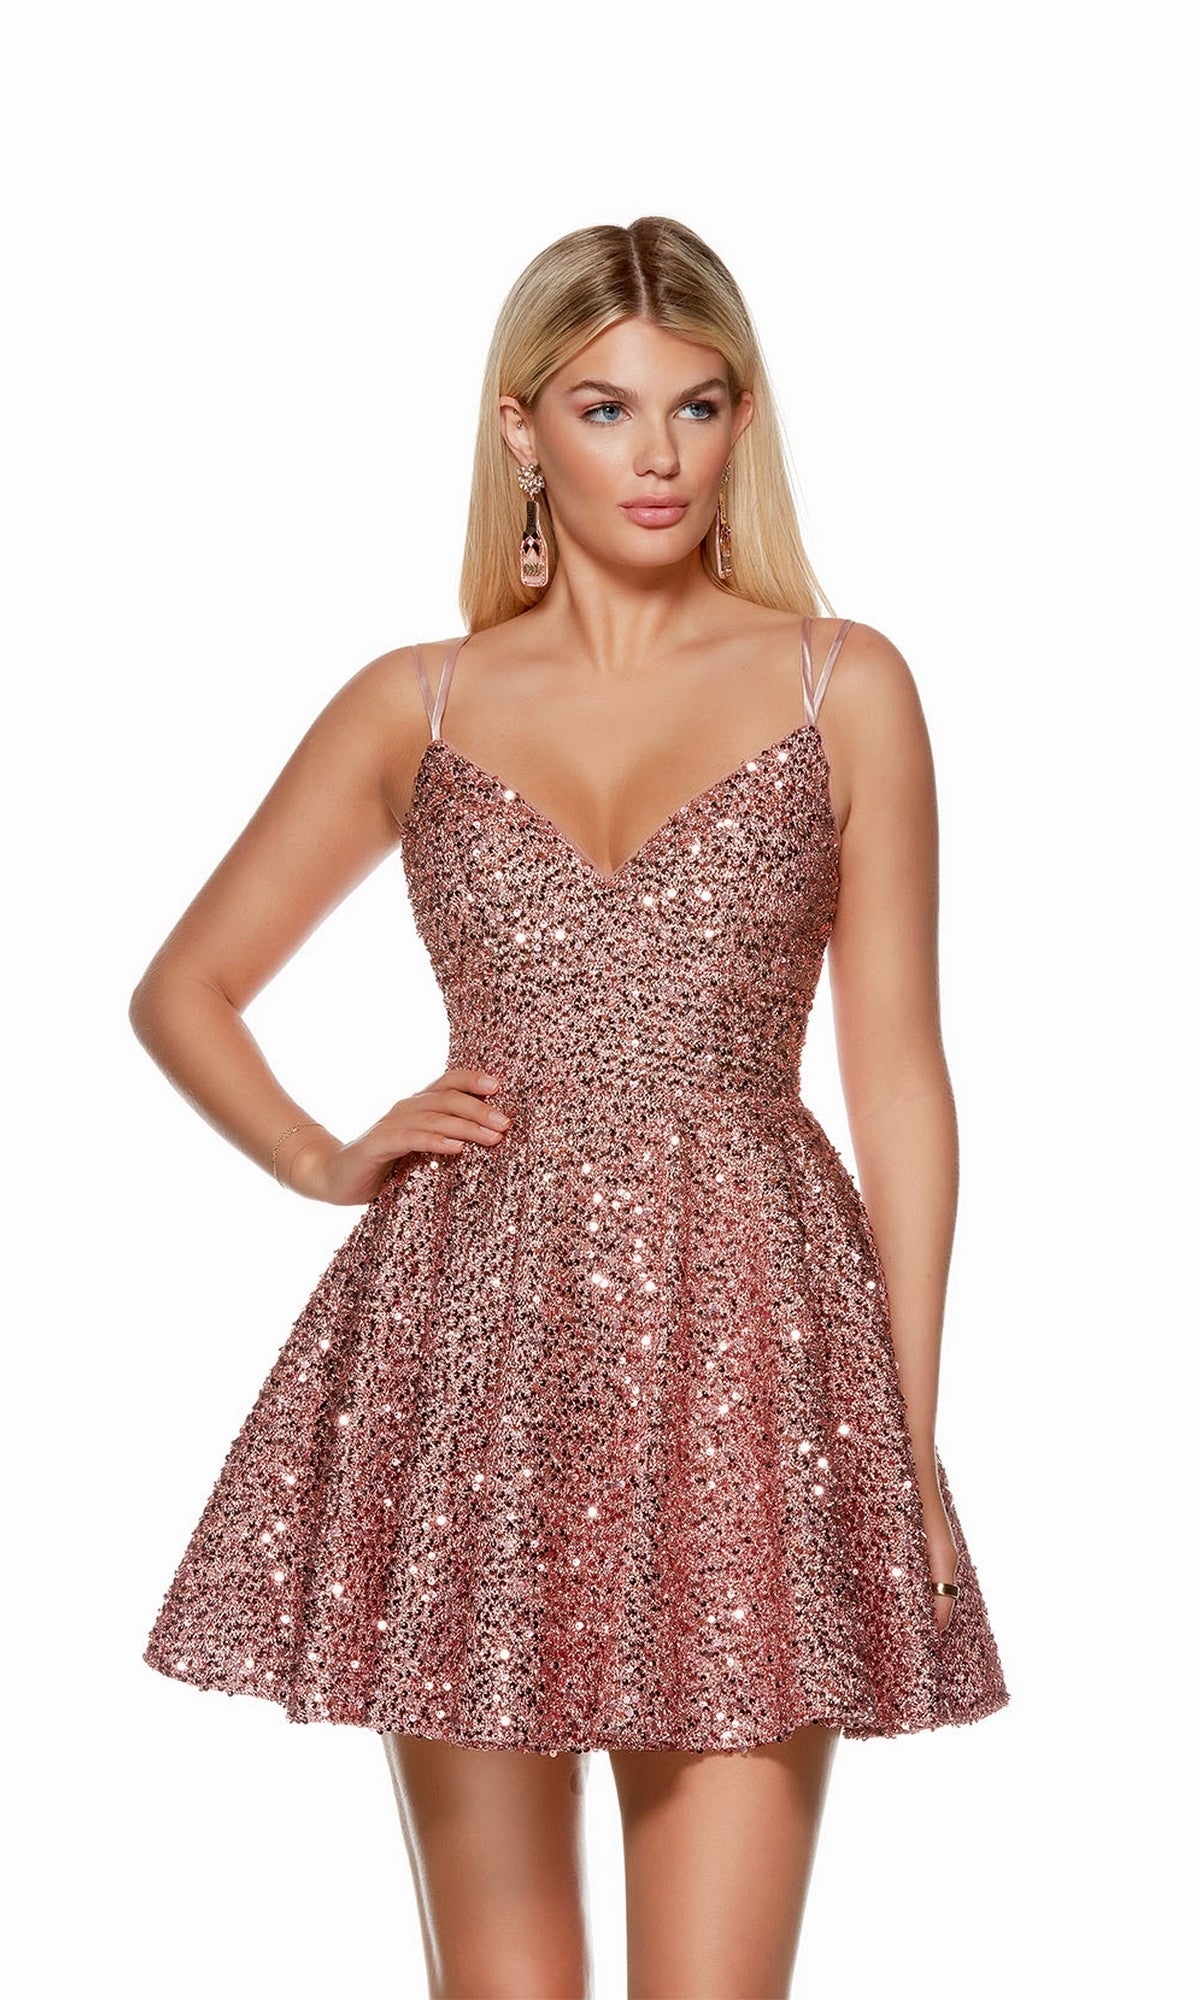 Light Mauve Short Dress By Alyce For Homecoming 3176